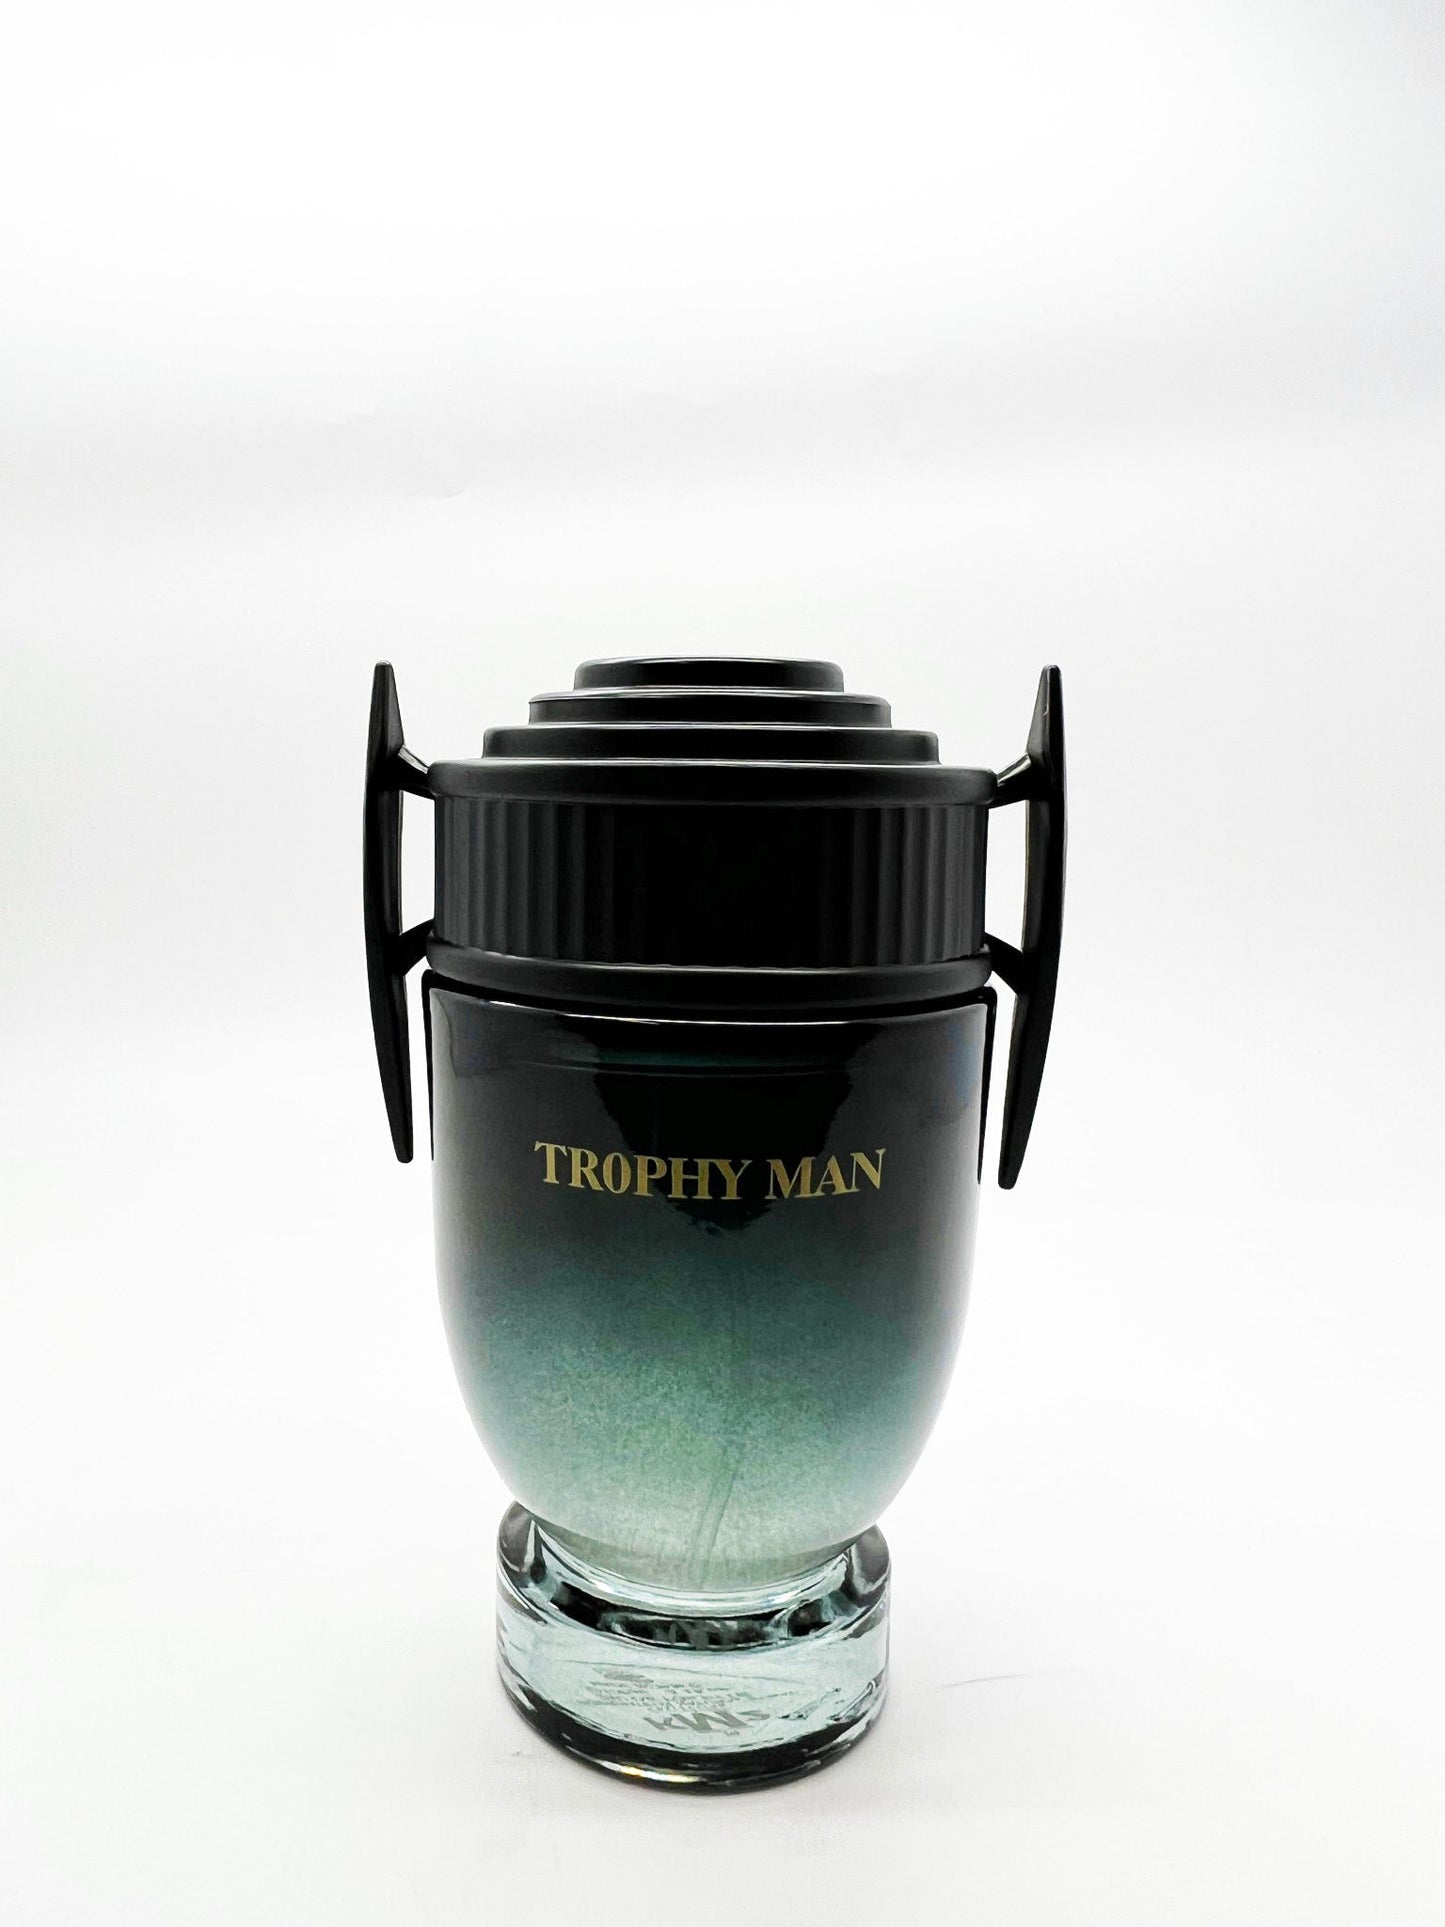 KM Trophy Man Victory Inspired By:  Paco Rabanne Invictus Victory, 2021